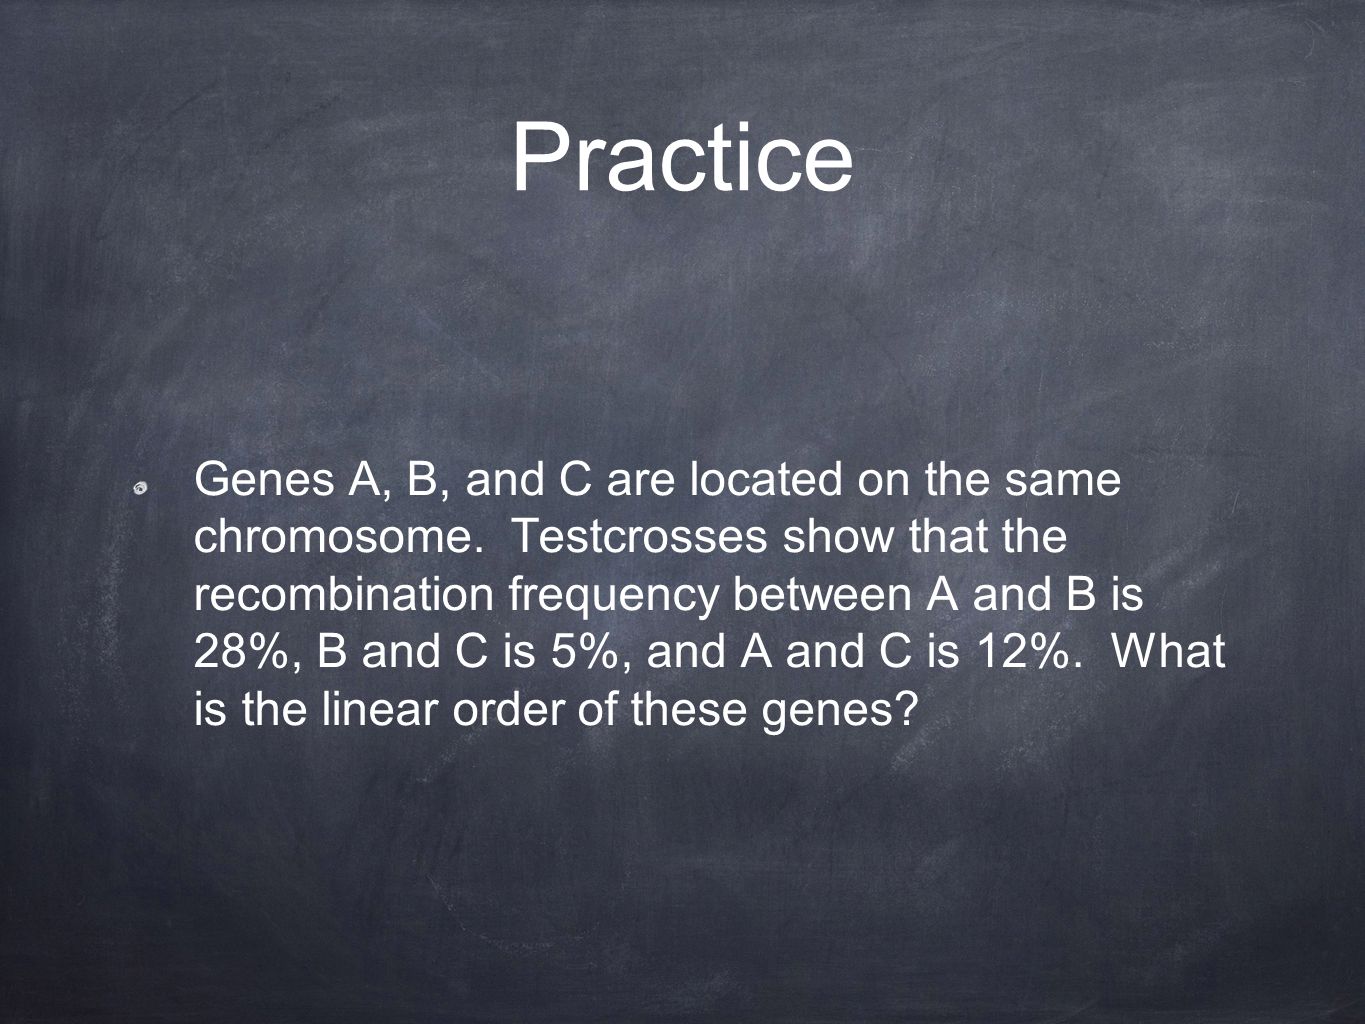 Practice Genes A, B, and C are located on the same chromosome.